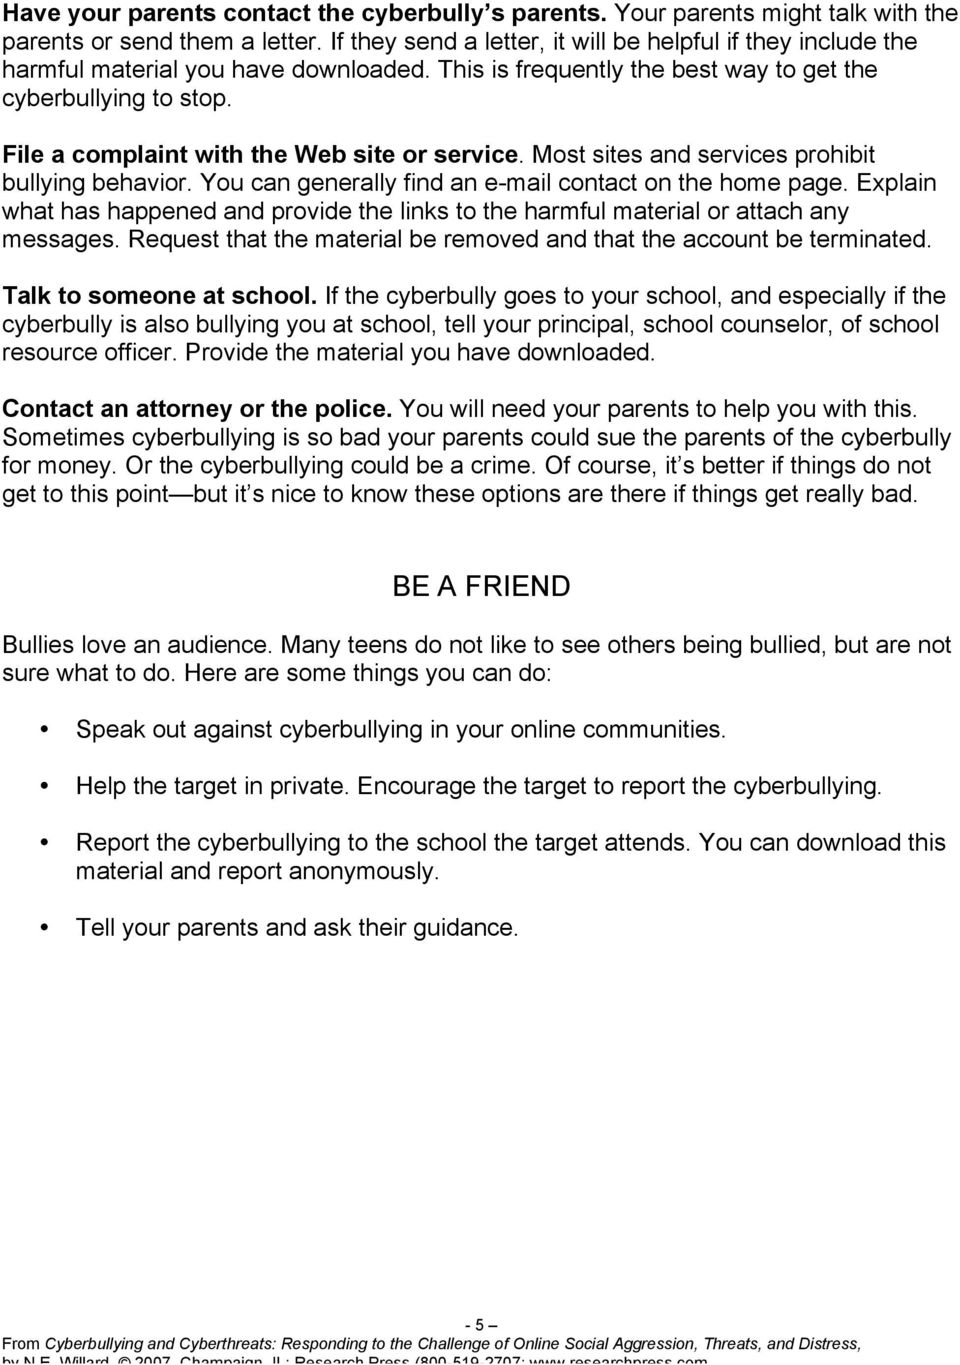 File a complaint with the Web site or service. Most sites and services prohibit bullying behavior. You can generally find an e-mail contact on the home page.